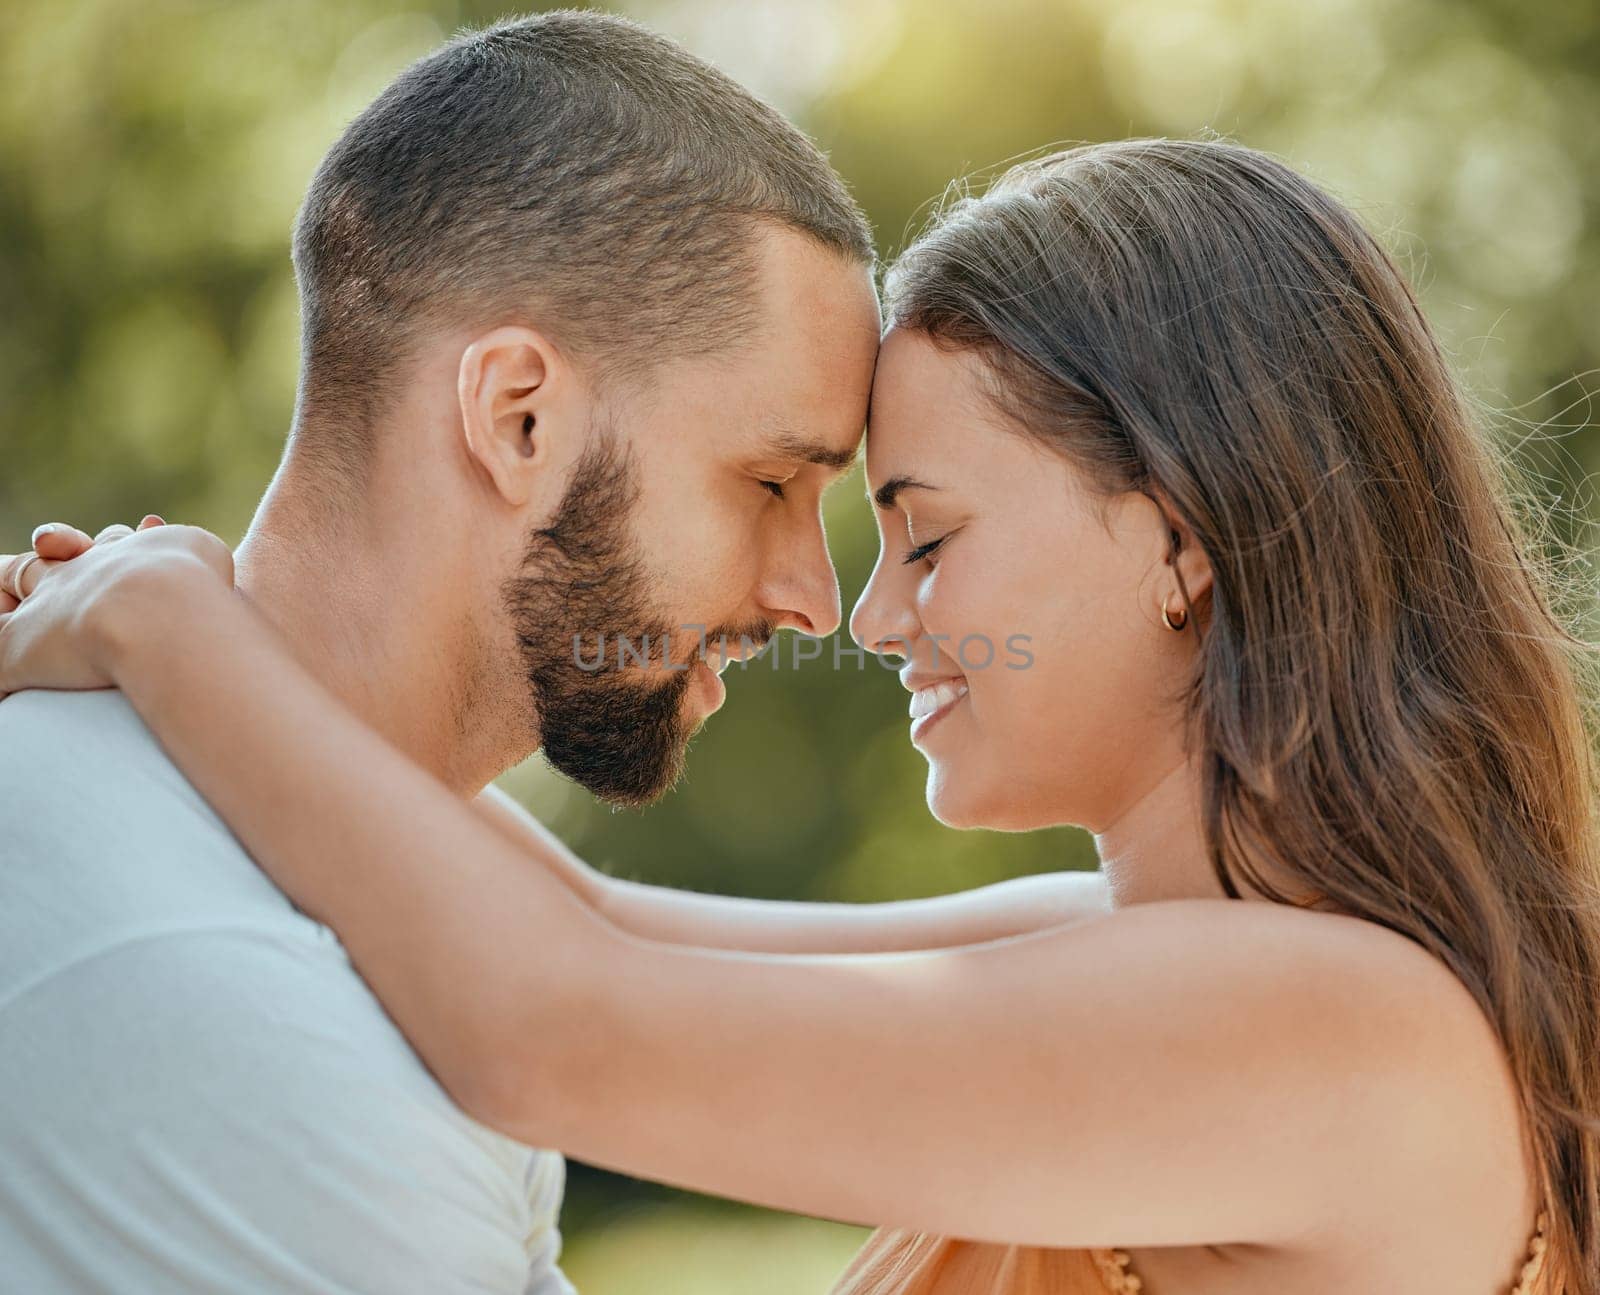 Couple, love and forehead touch in garden, summer park or outdoor backyard in Spain for care, happiness and easy lifestyle together. Smile, romance and date of man, woman and people in happy marriage.